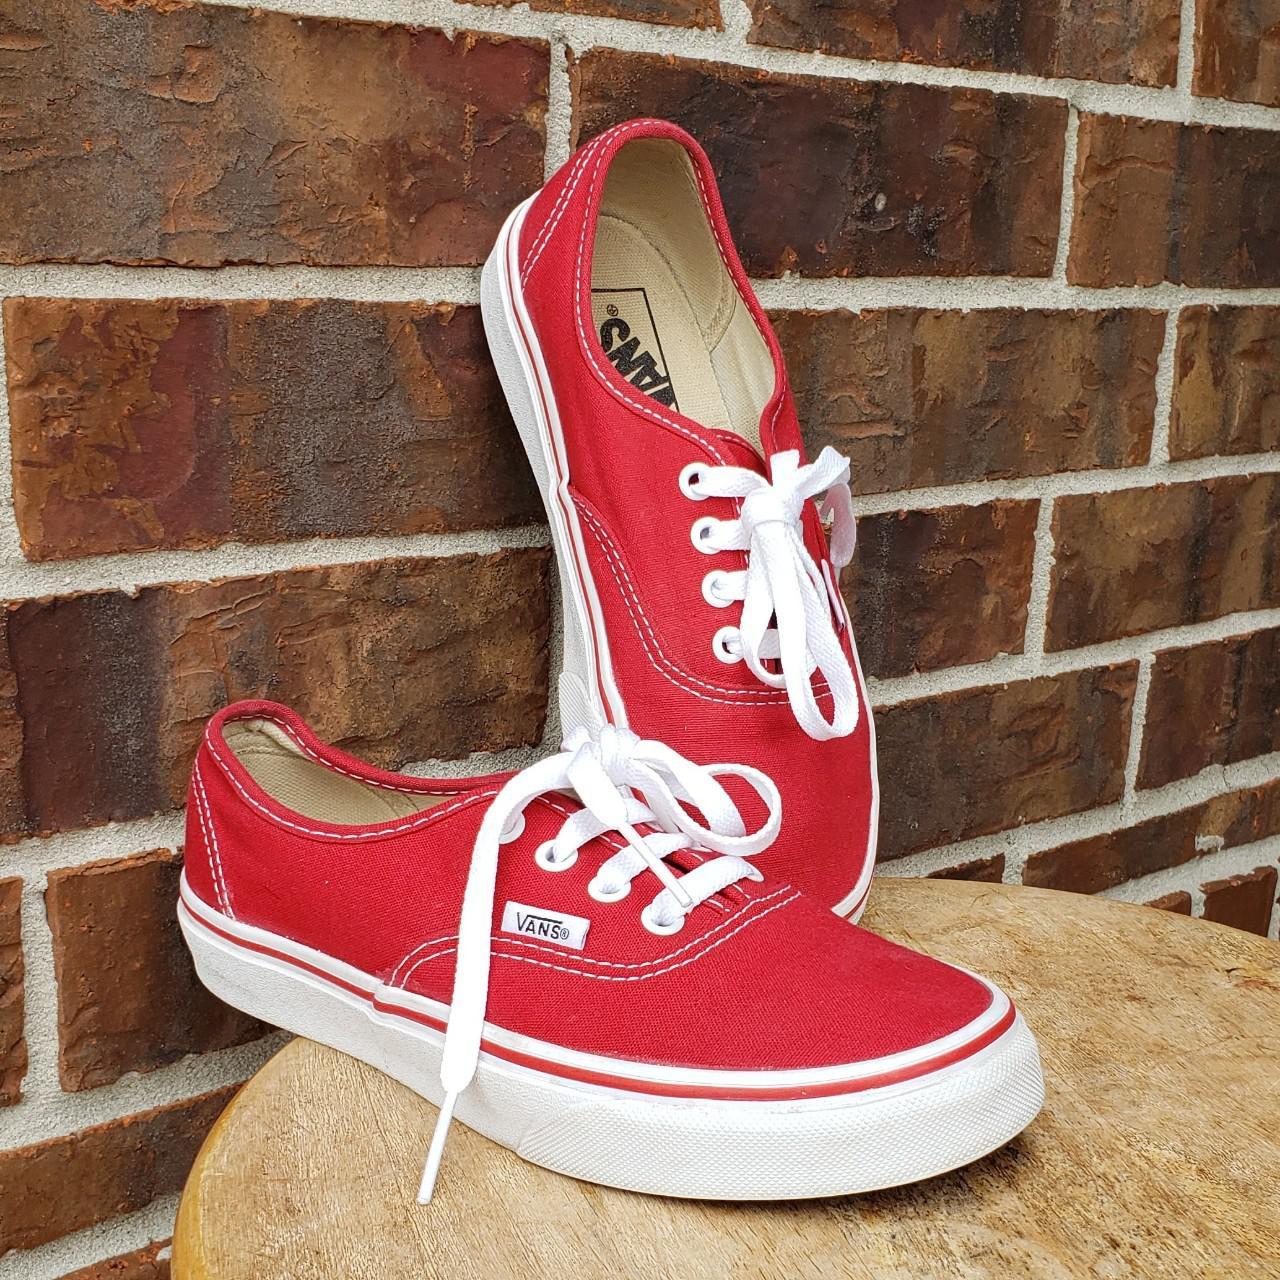 Product Image 1 - Vans Authentic 

♤ Red low